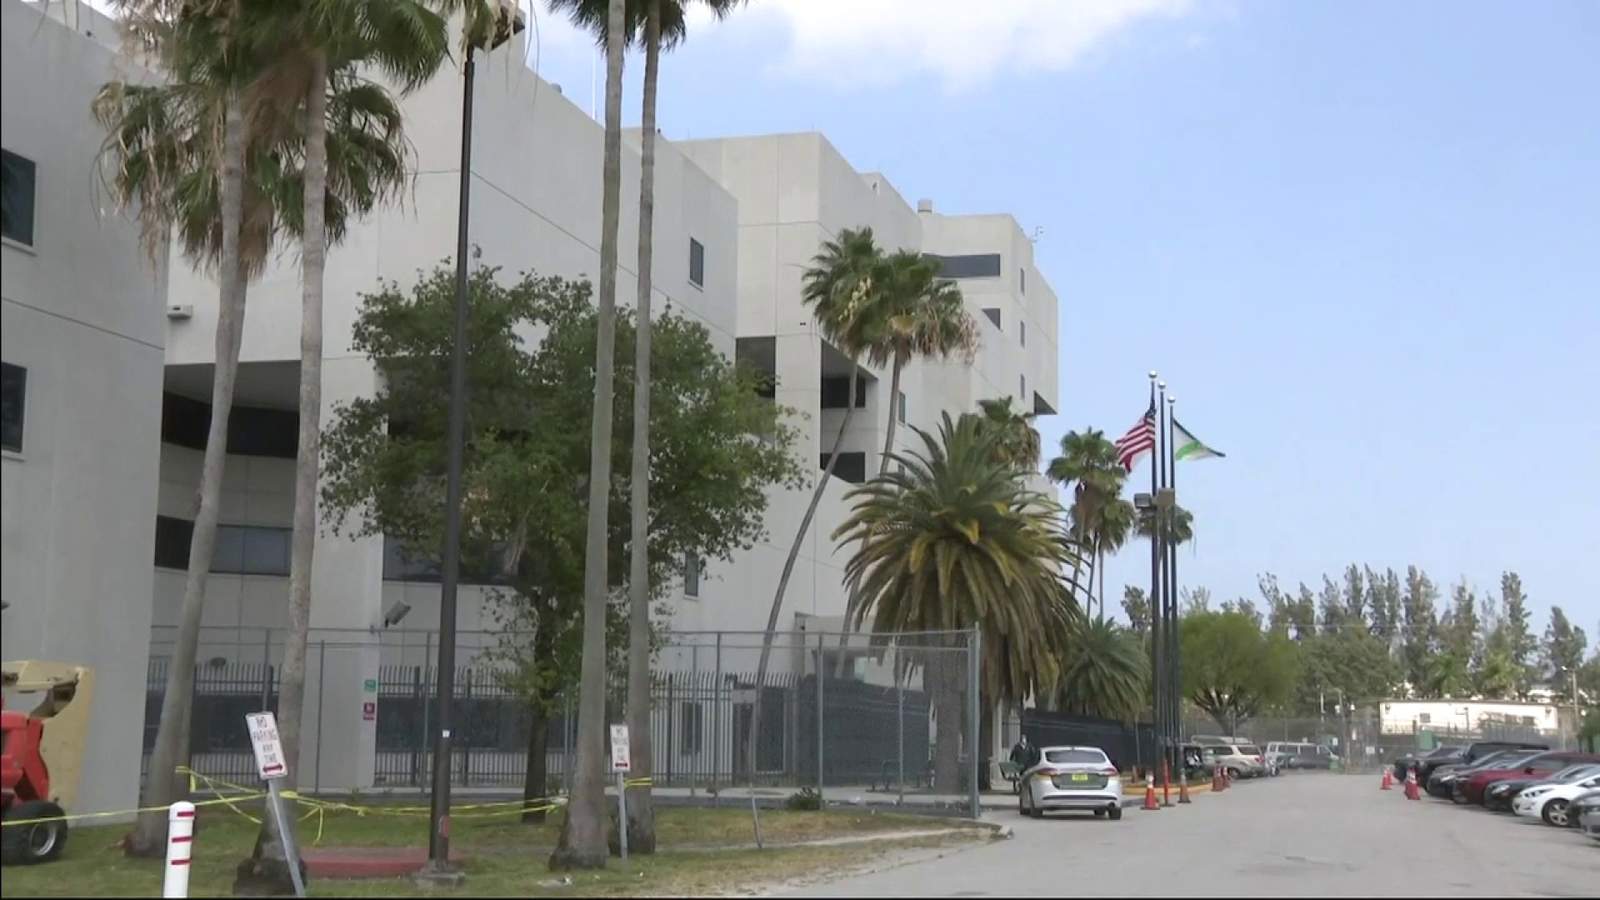 South Florida corrections officers, inmates growing concerned about lack of safety in prisons as COVID-19 cases spike